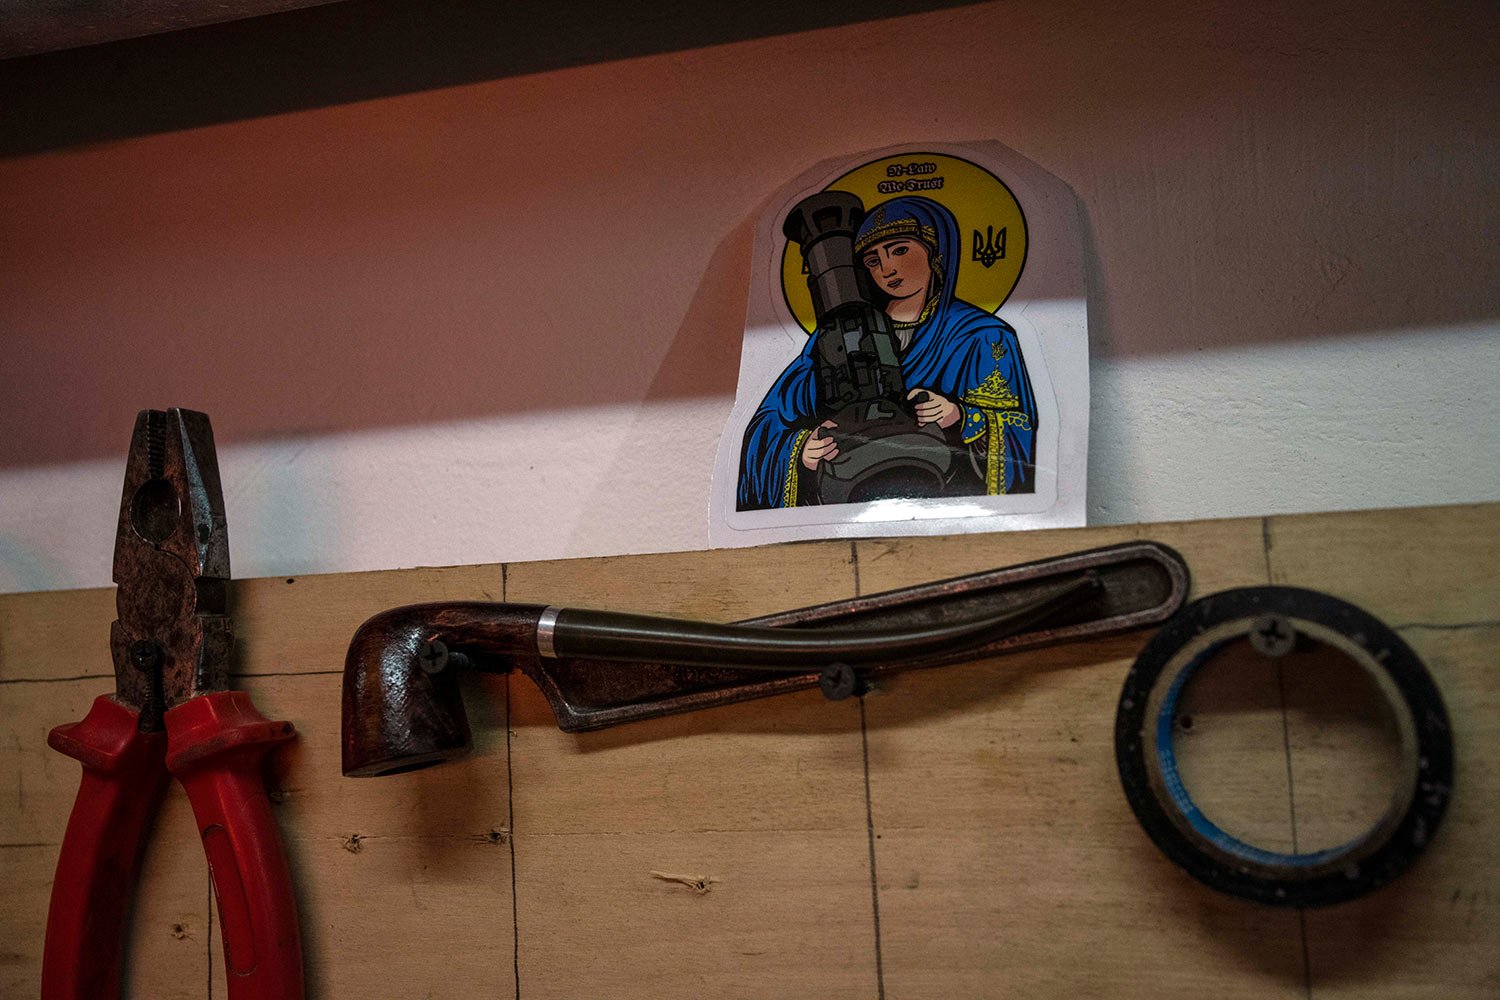  A sticker with the image known as "Saint Javelin" depicting a saint holding a Javelin, an American-made portable anti-tank missile system, is displayed in an artists co-living studio space that is used as a bomb shelter and a place to help the Terri